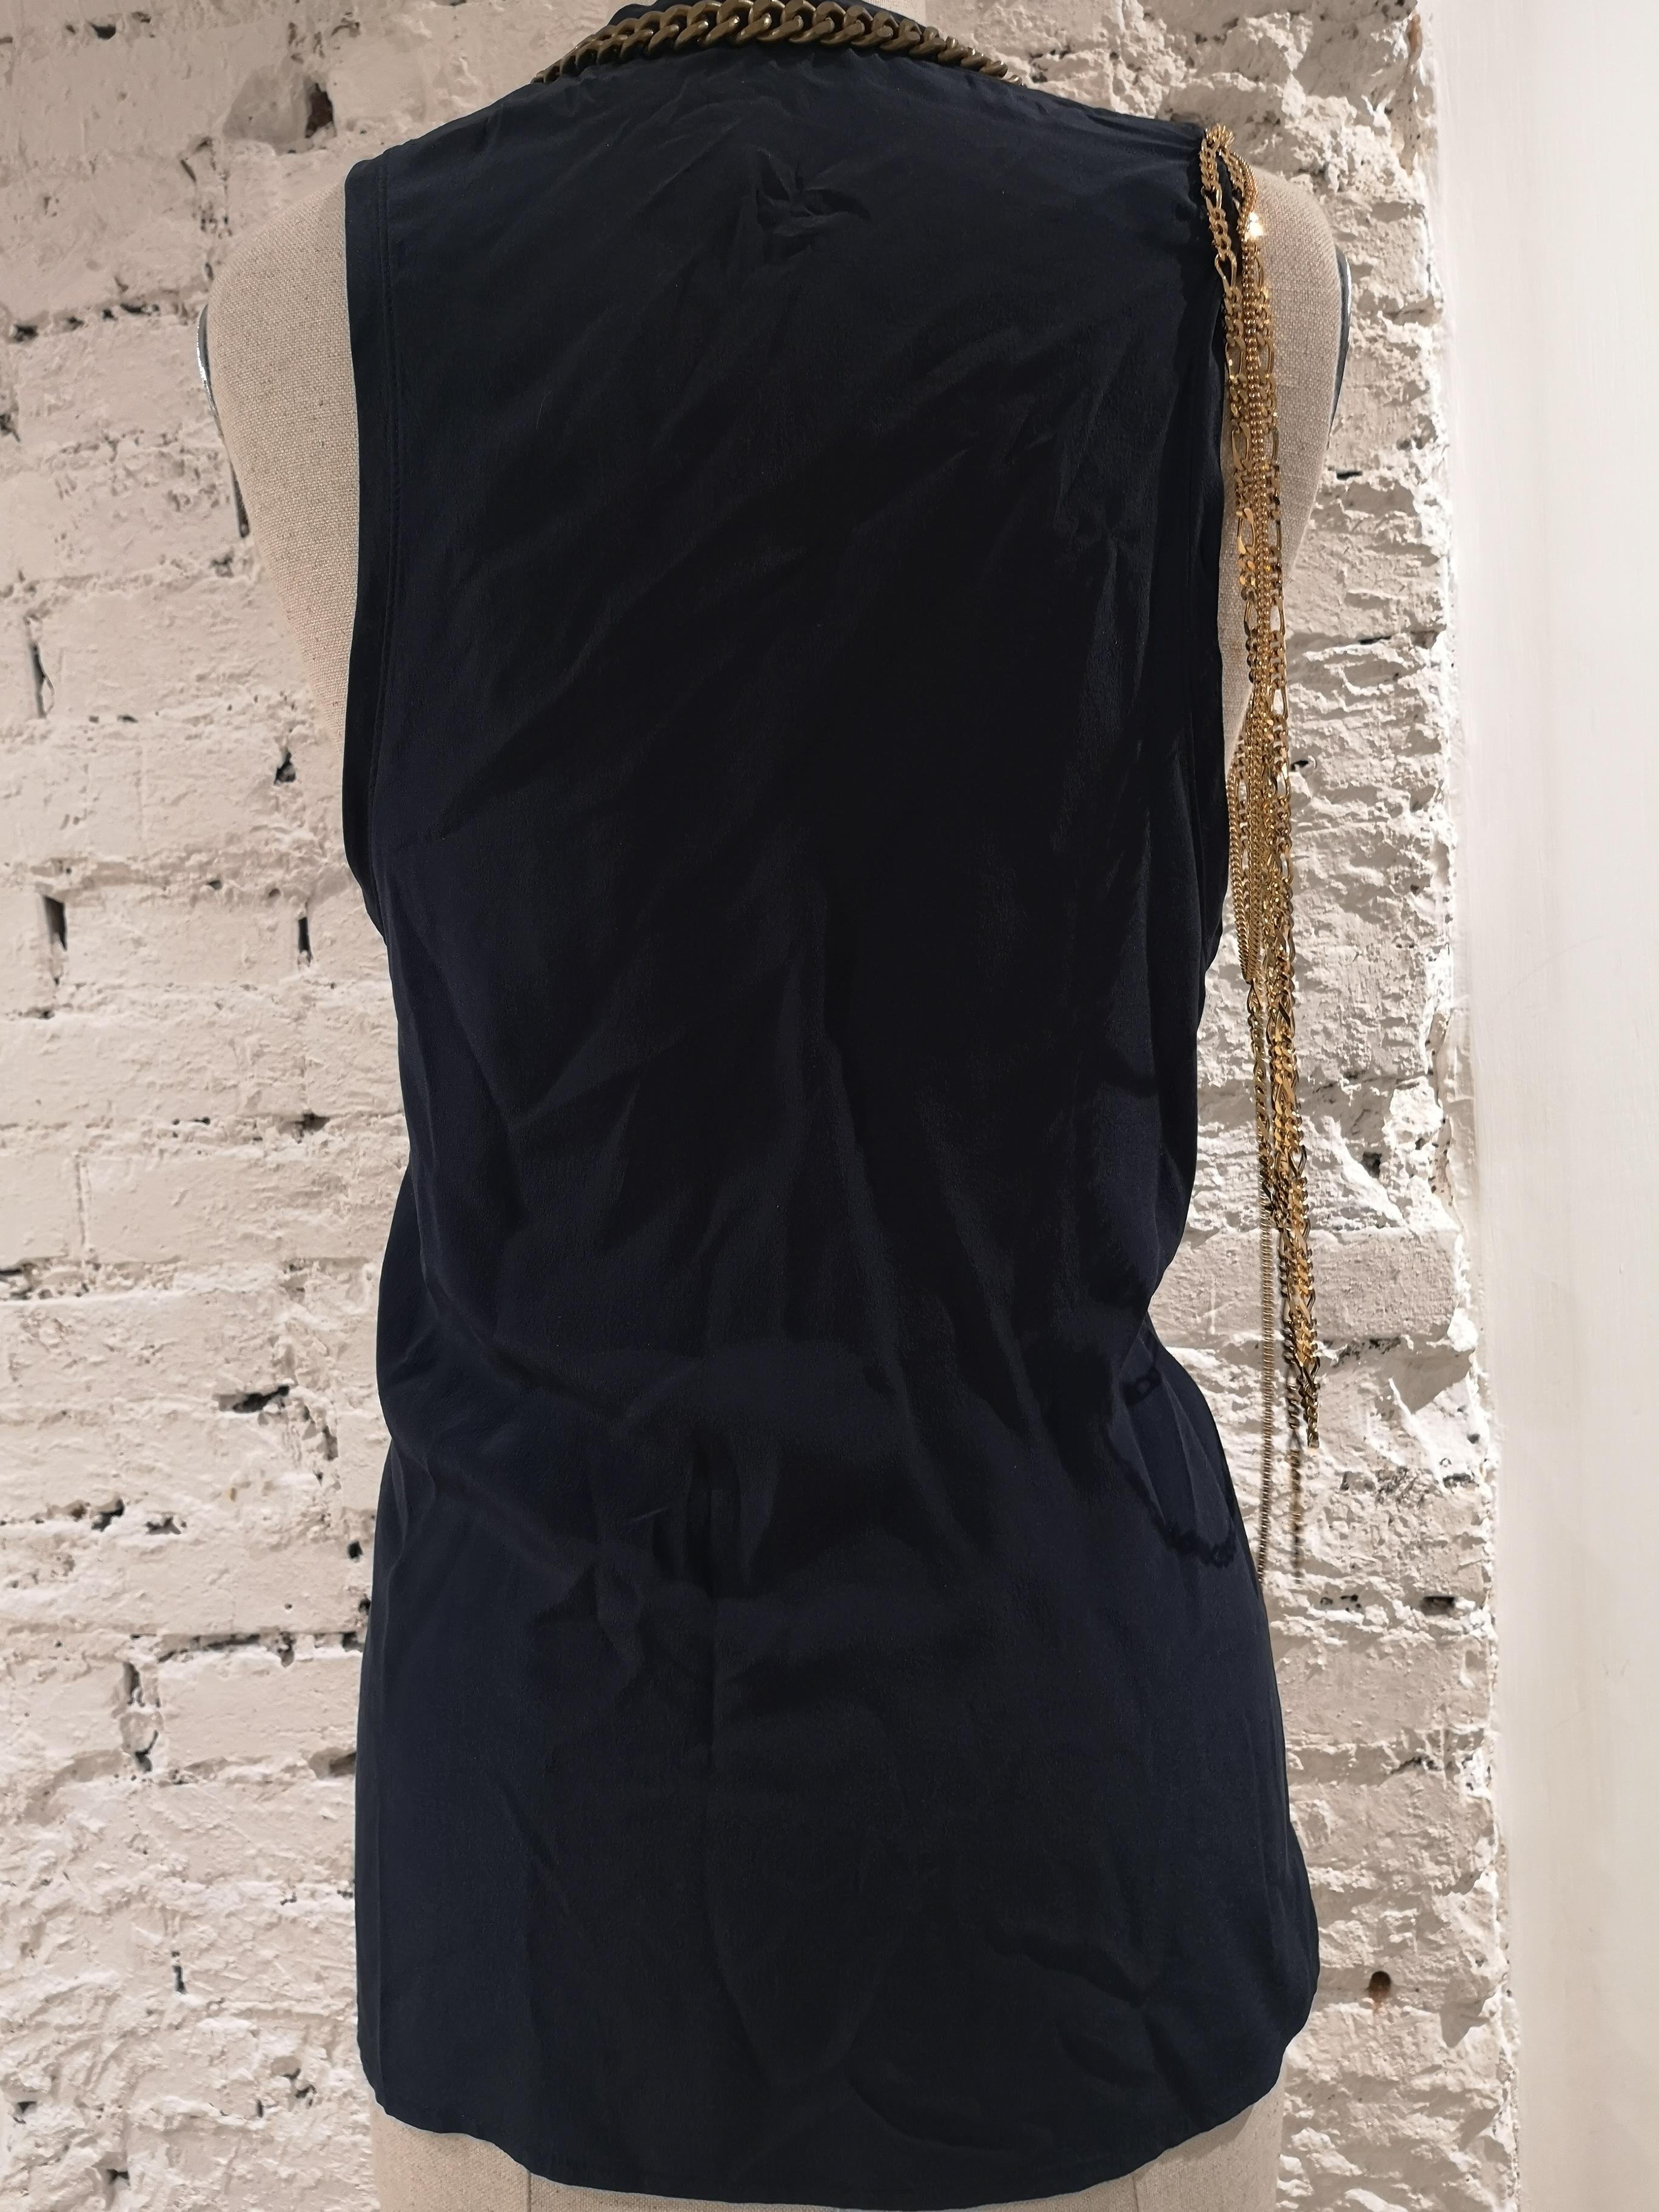 Balmain Navy Blue Sleeveless Top with Gold Chains For Sale 2